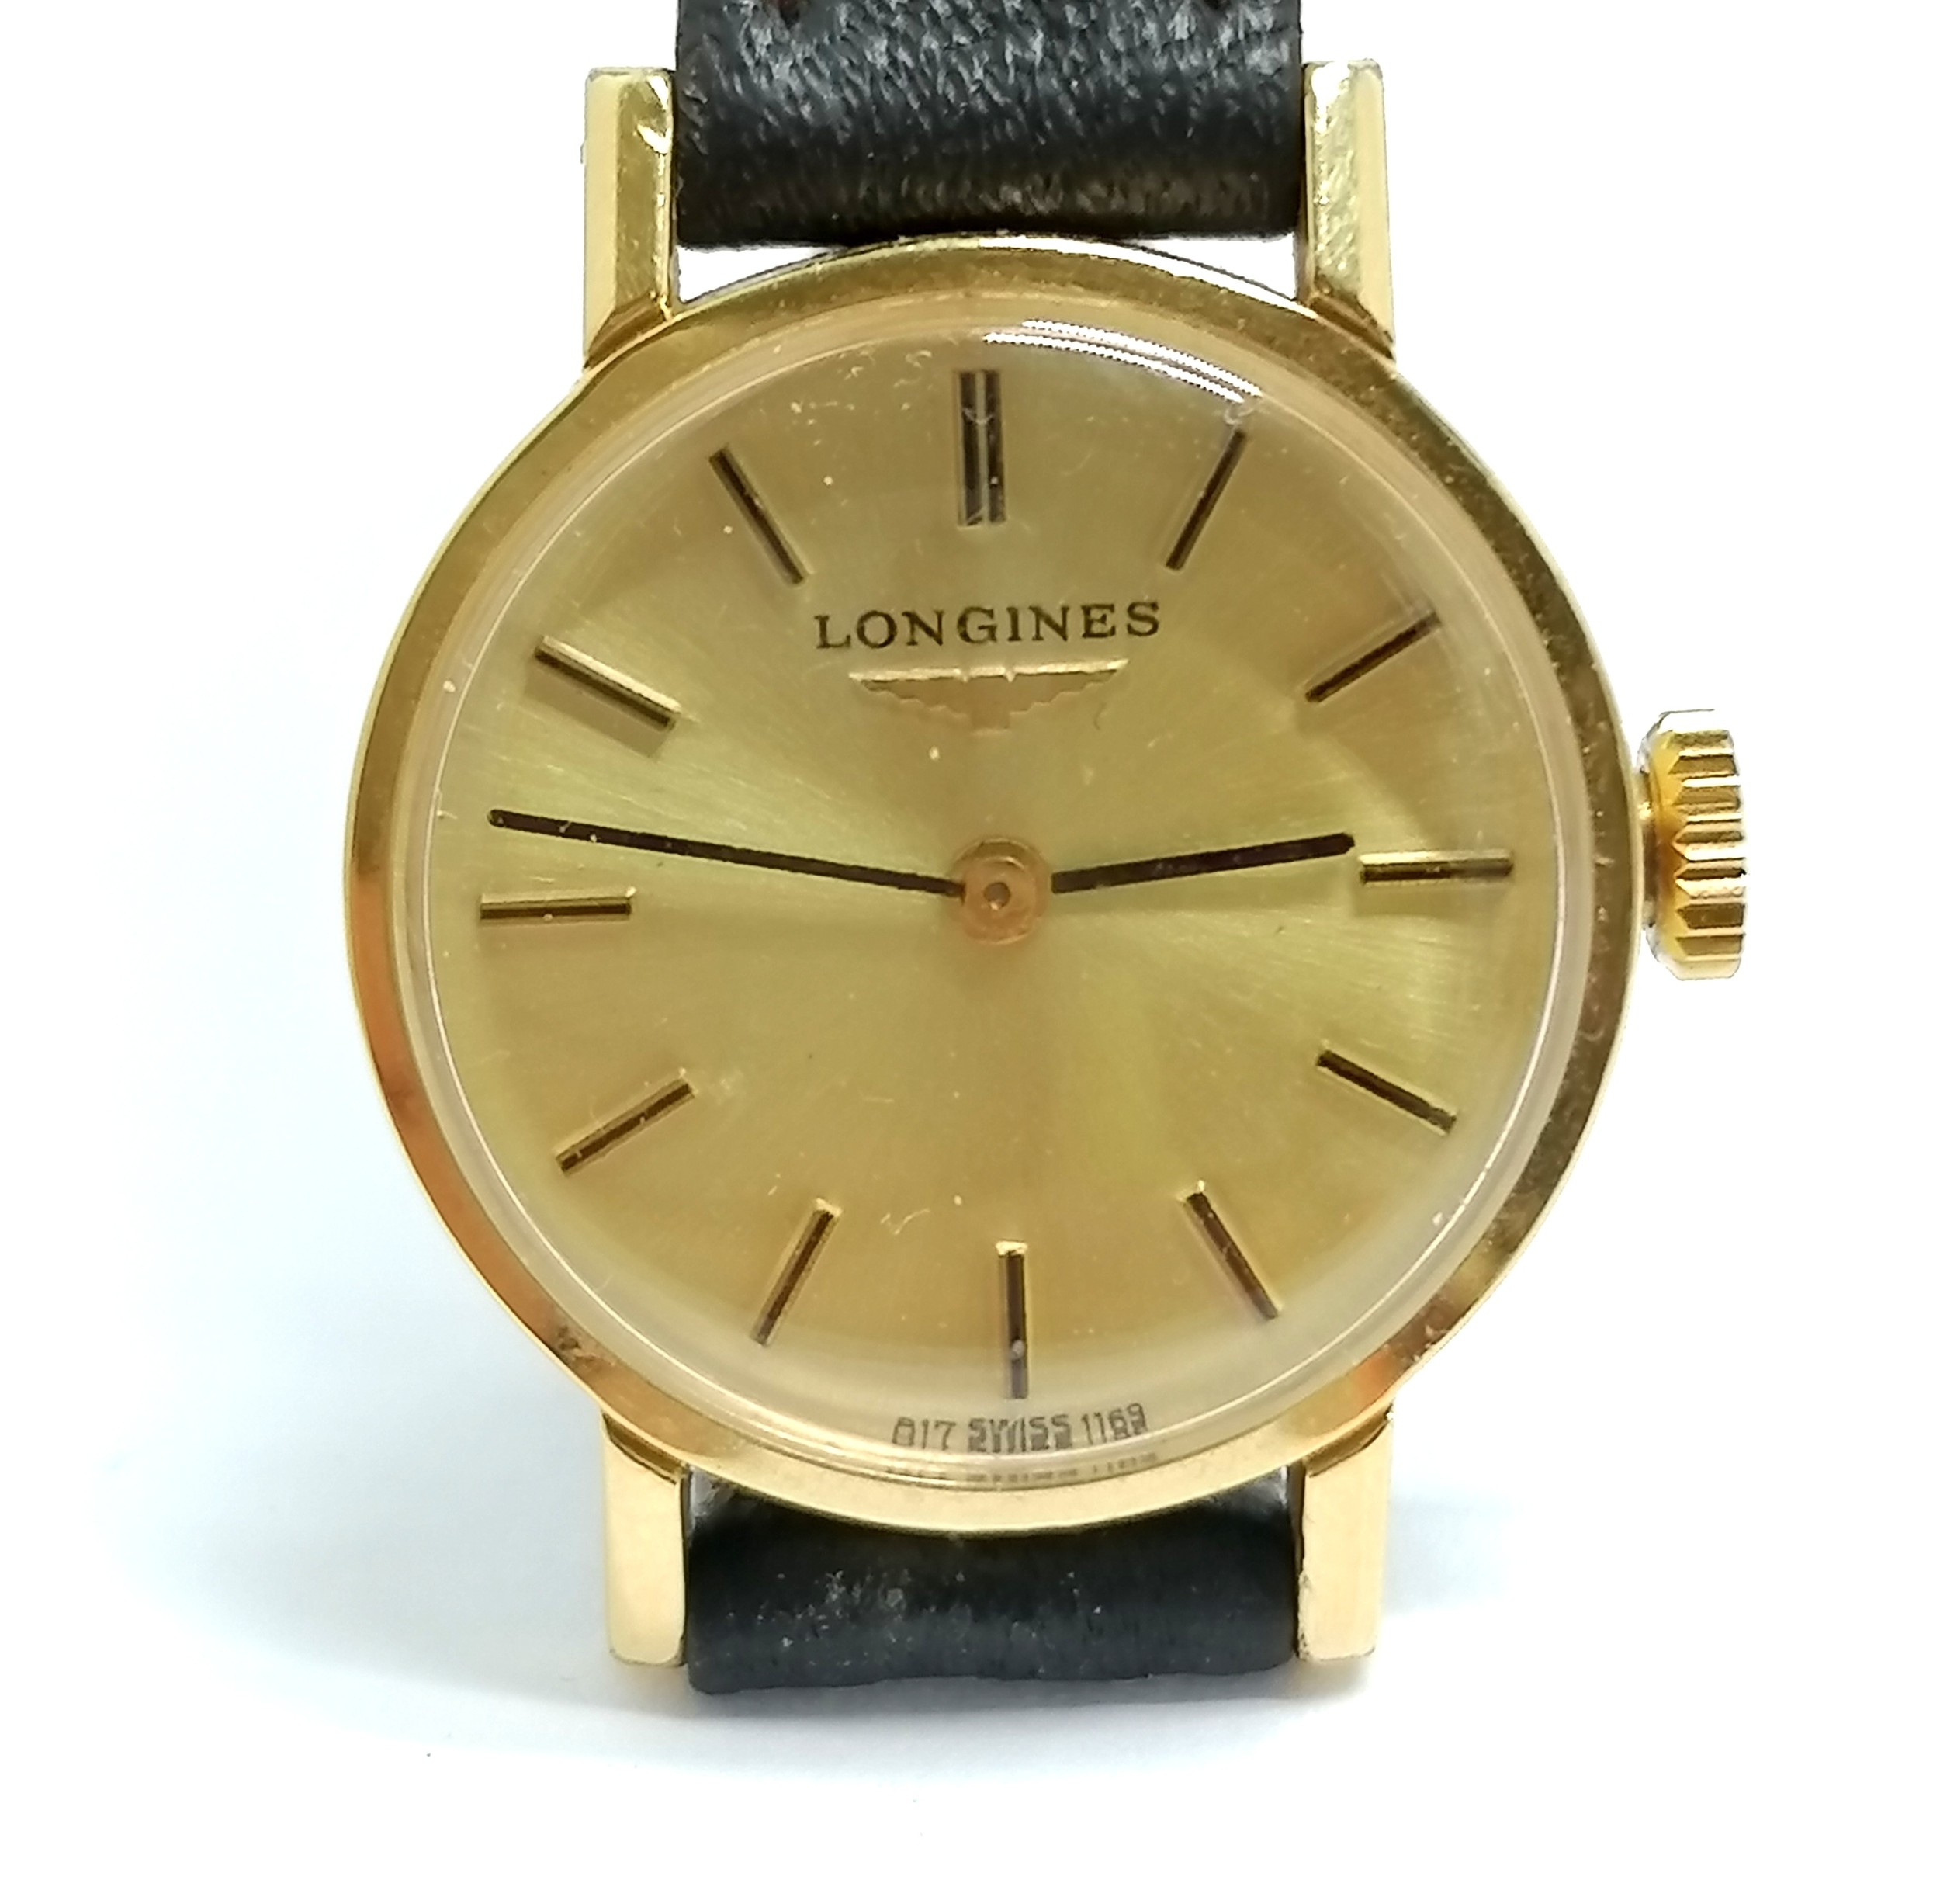 Ladies Longines manual wind wristwatch (20mm case) in original box with 1984 dated papers ~ for